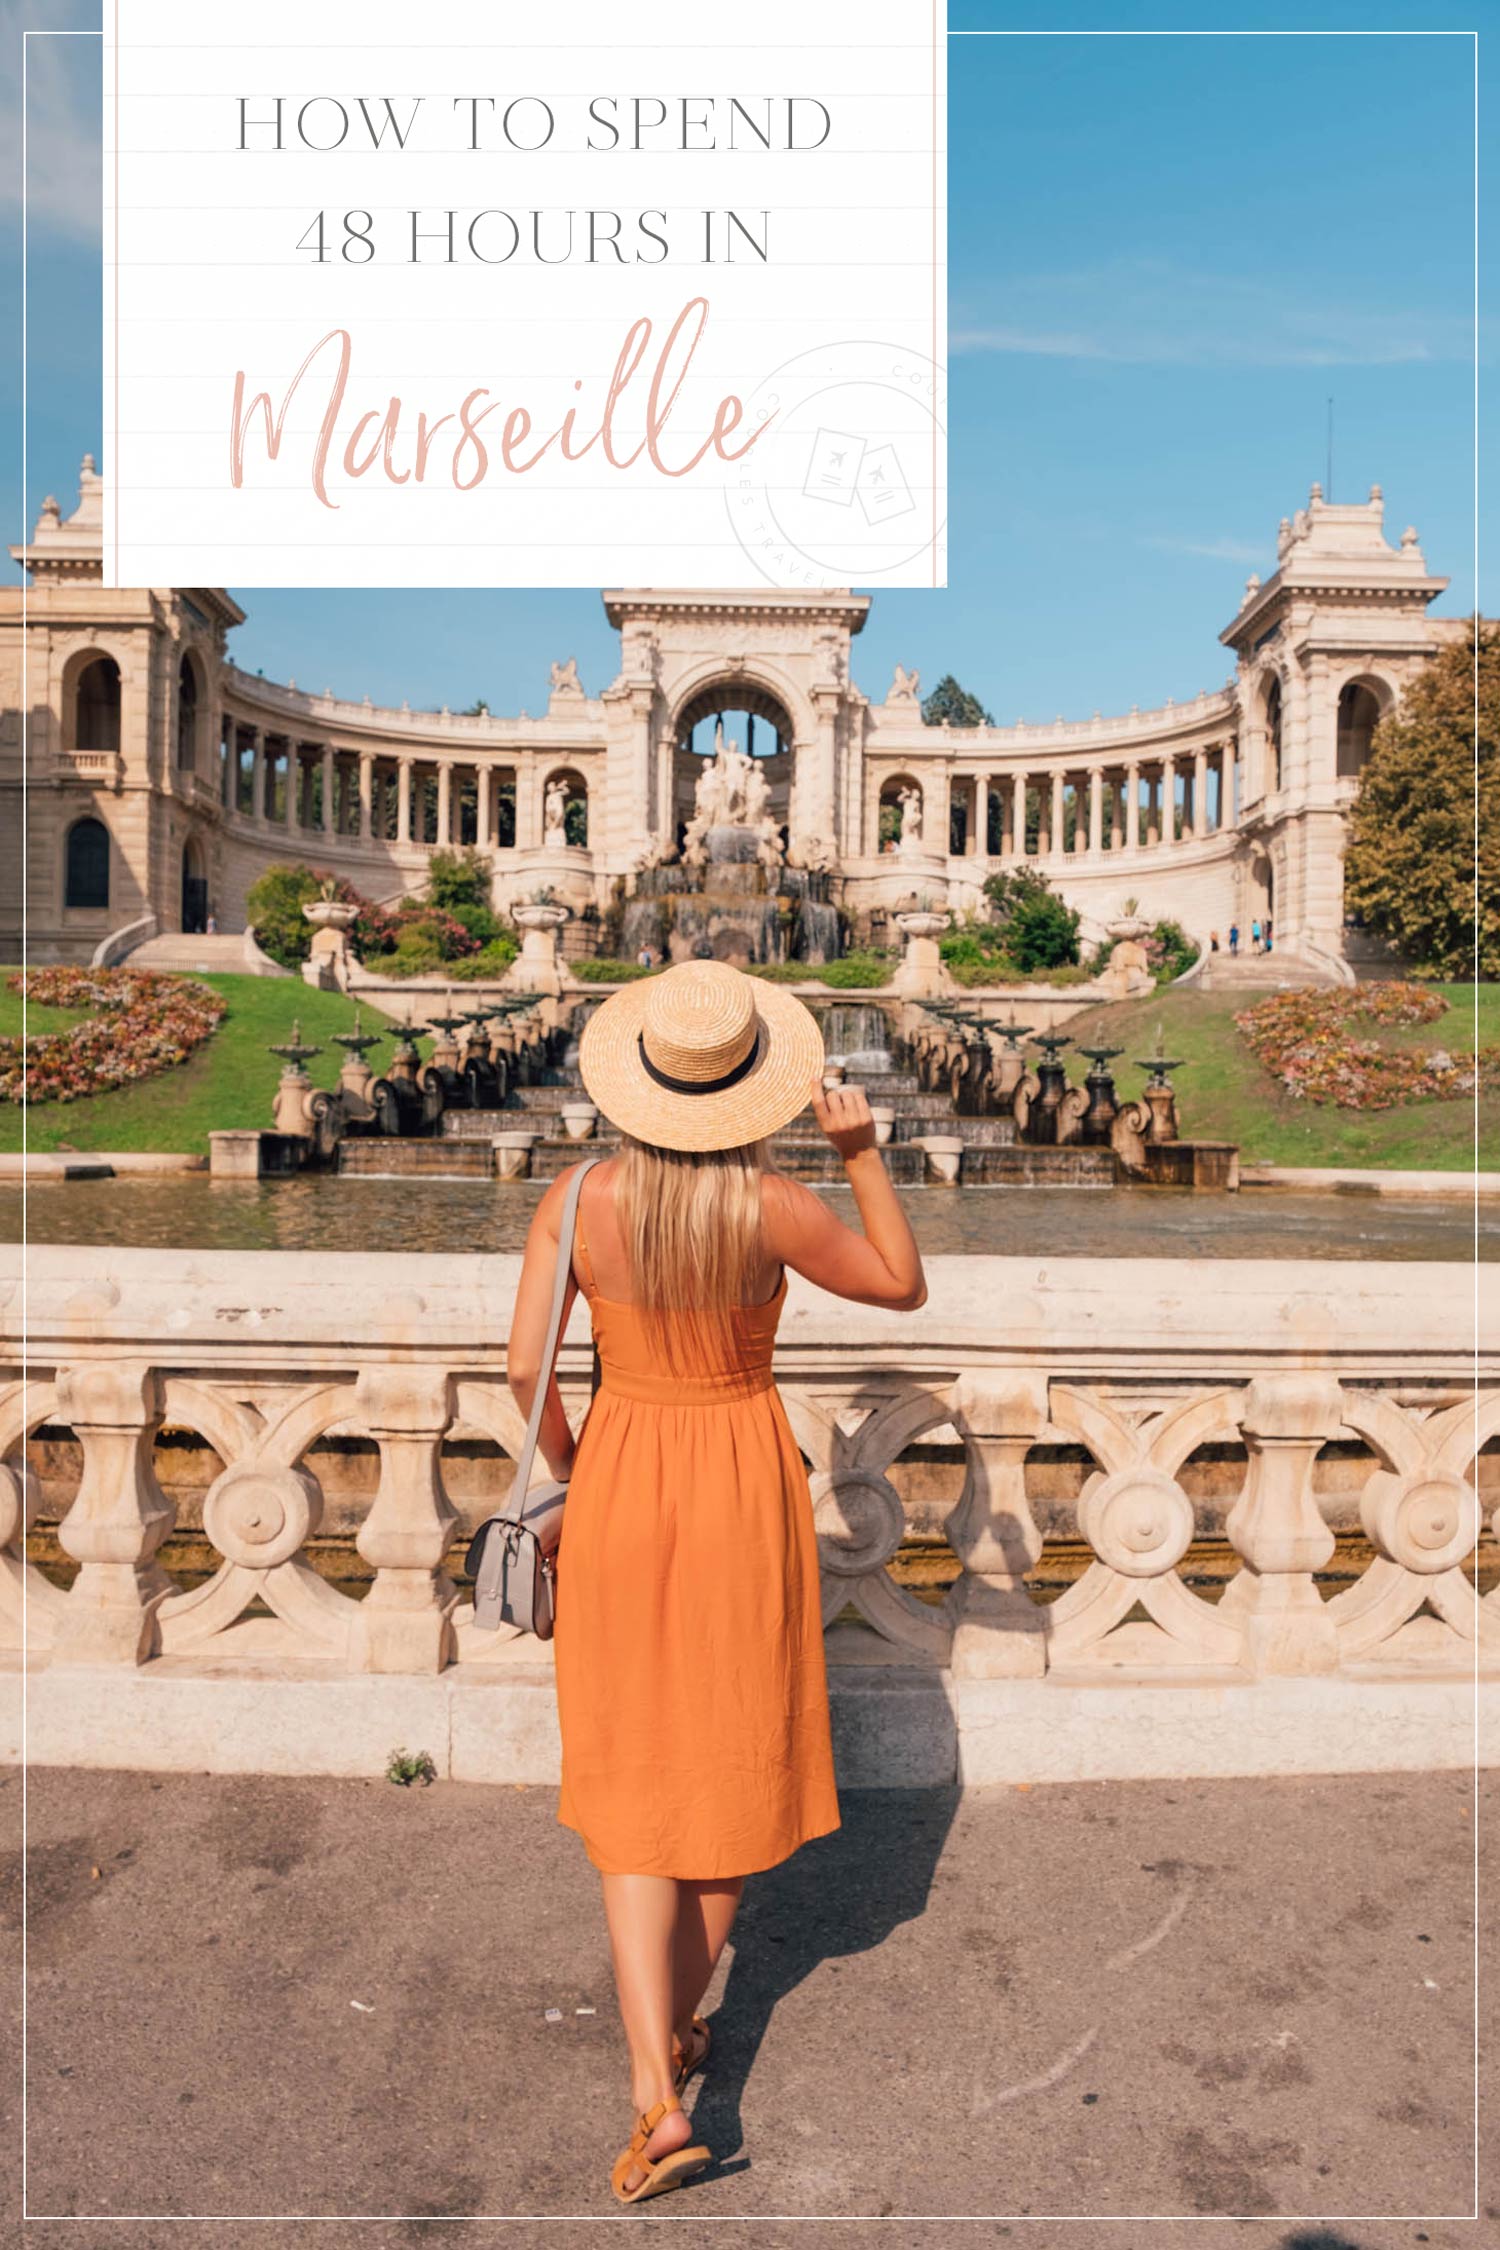 How to spend 48 hours in Marseille